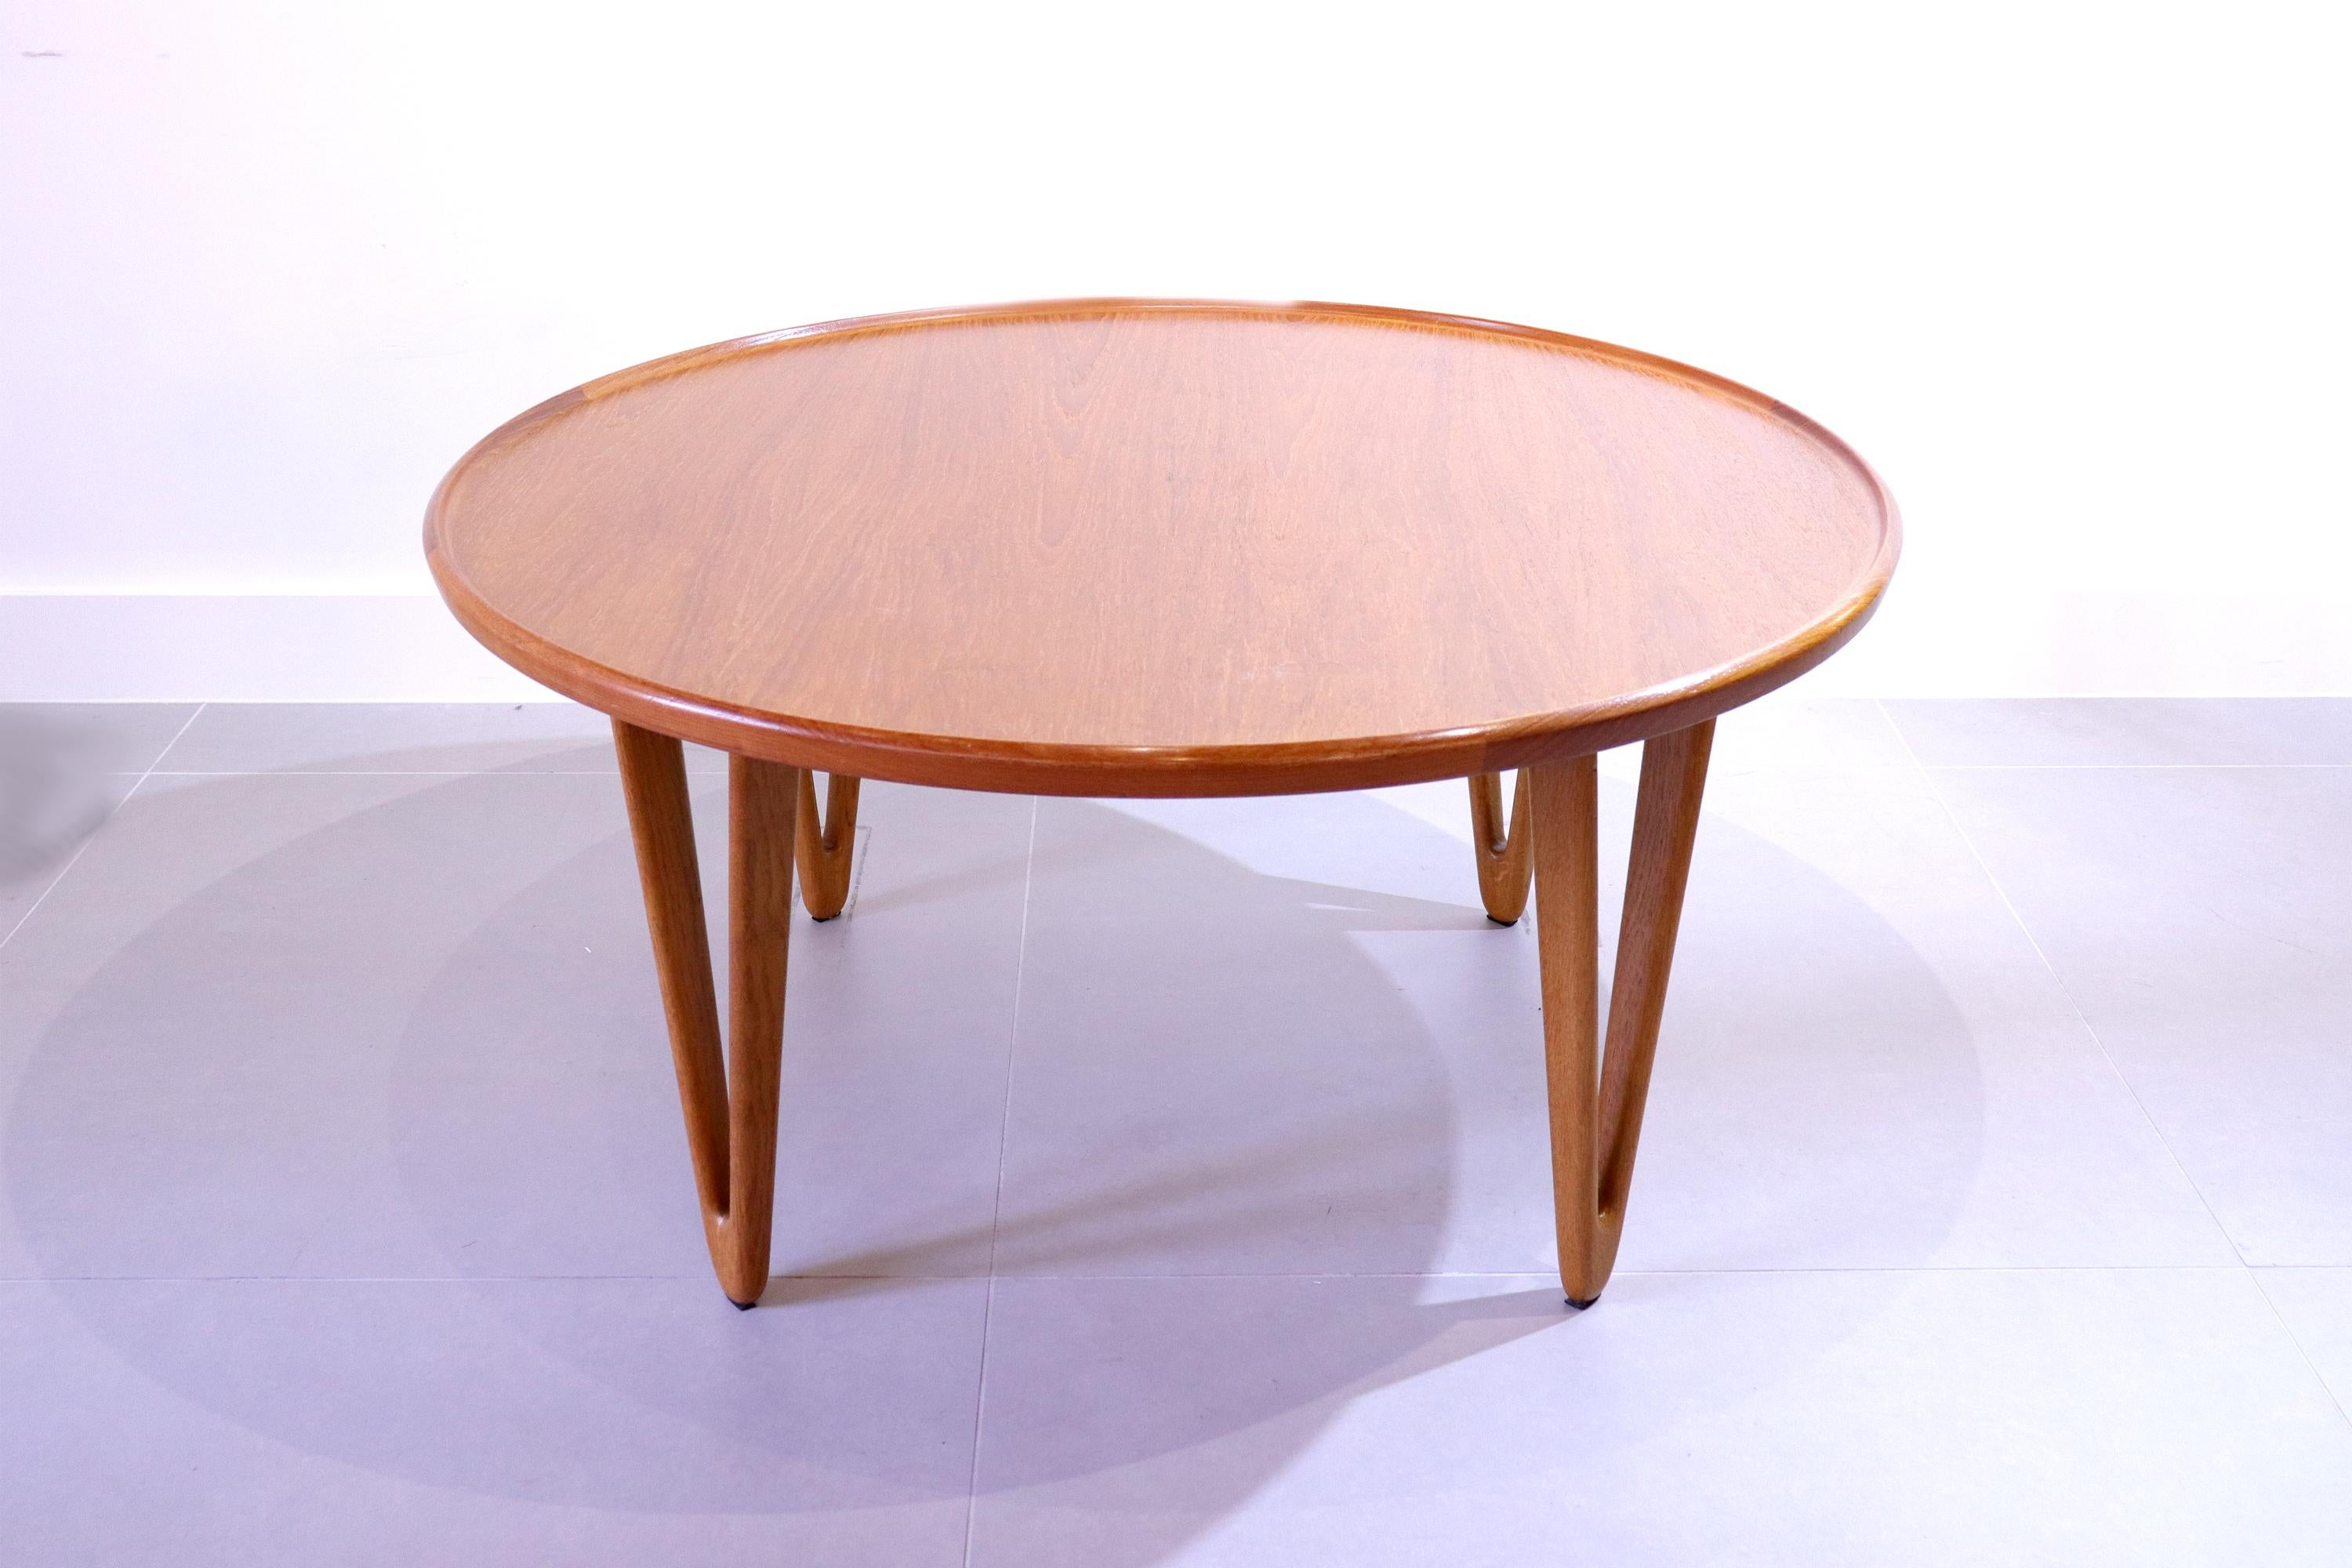 A rare round Danish 1950's coffee teak wood coffee table designed by husband and wife designers Tove Kindt - Larsen and Edvard Kindt - Larsen. 

The table features a large round sunken table top set on four sculptural hollow triangle teak legs which